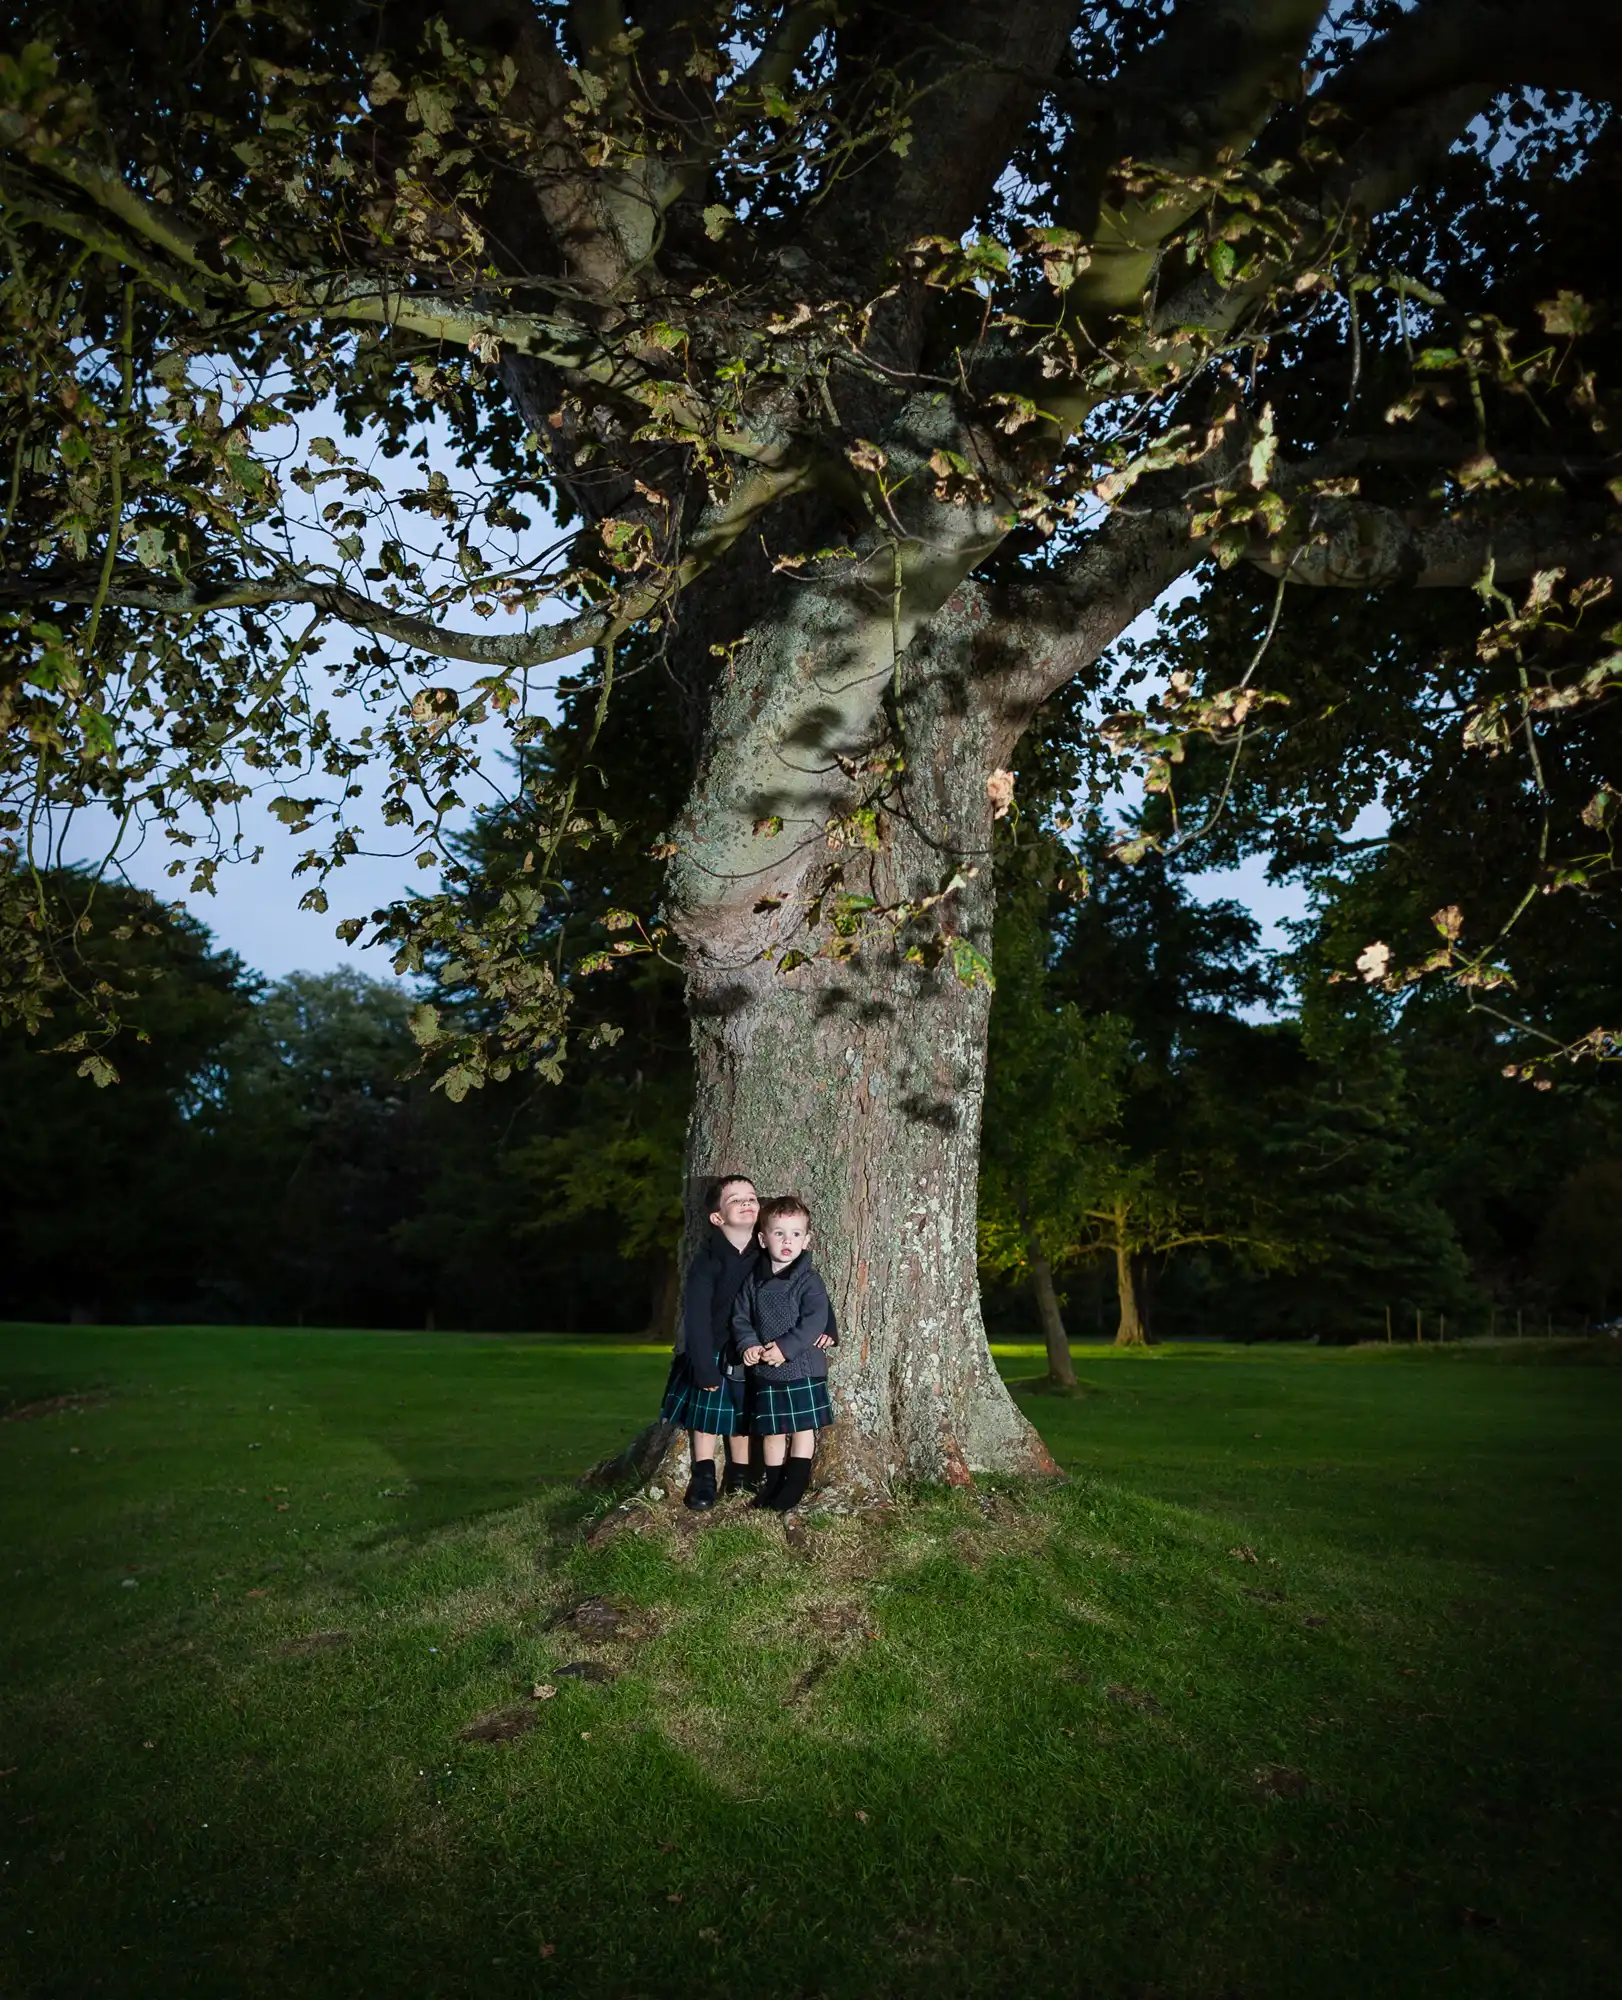 Two people embracing next to a large tree in a park at dusk, with illuminated leaves overhead.